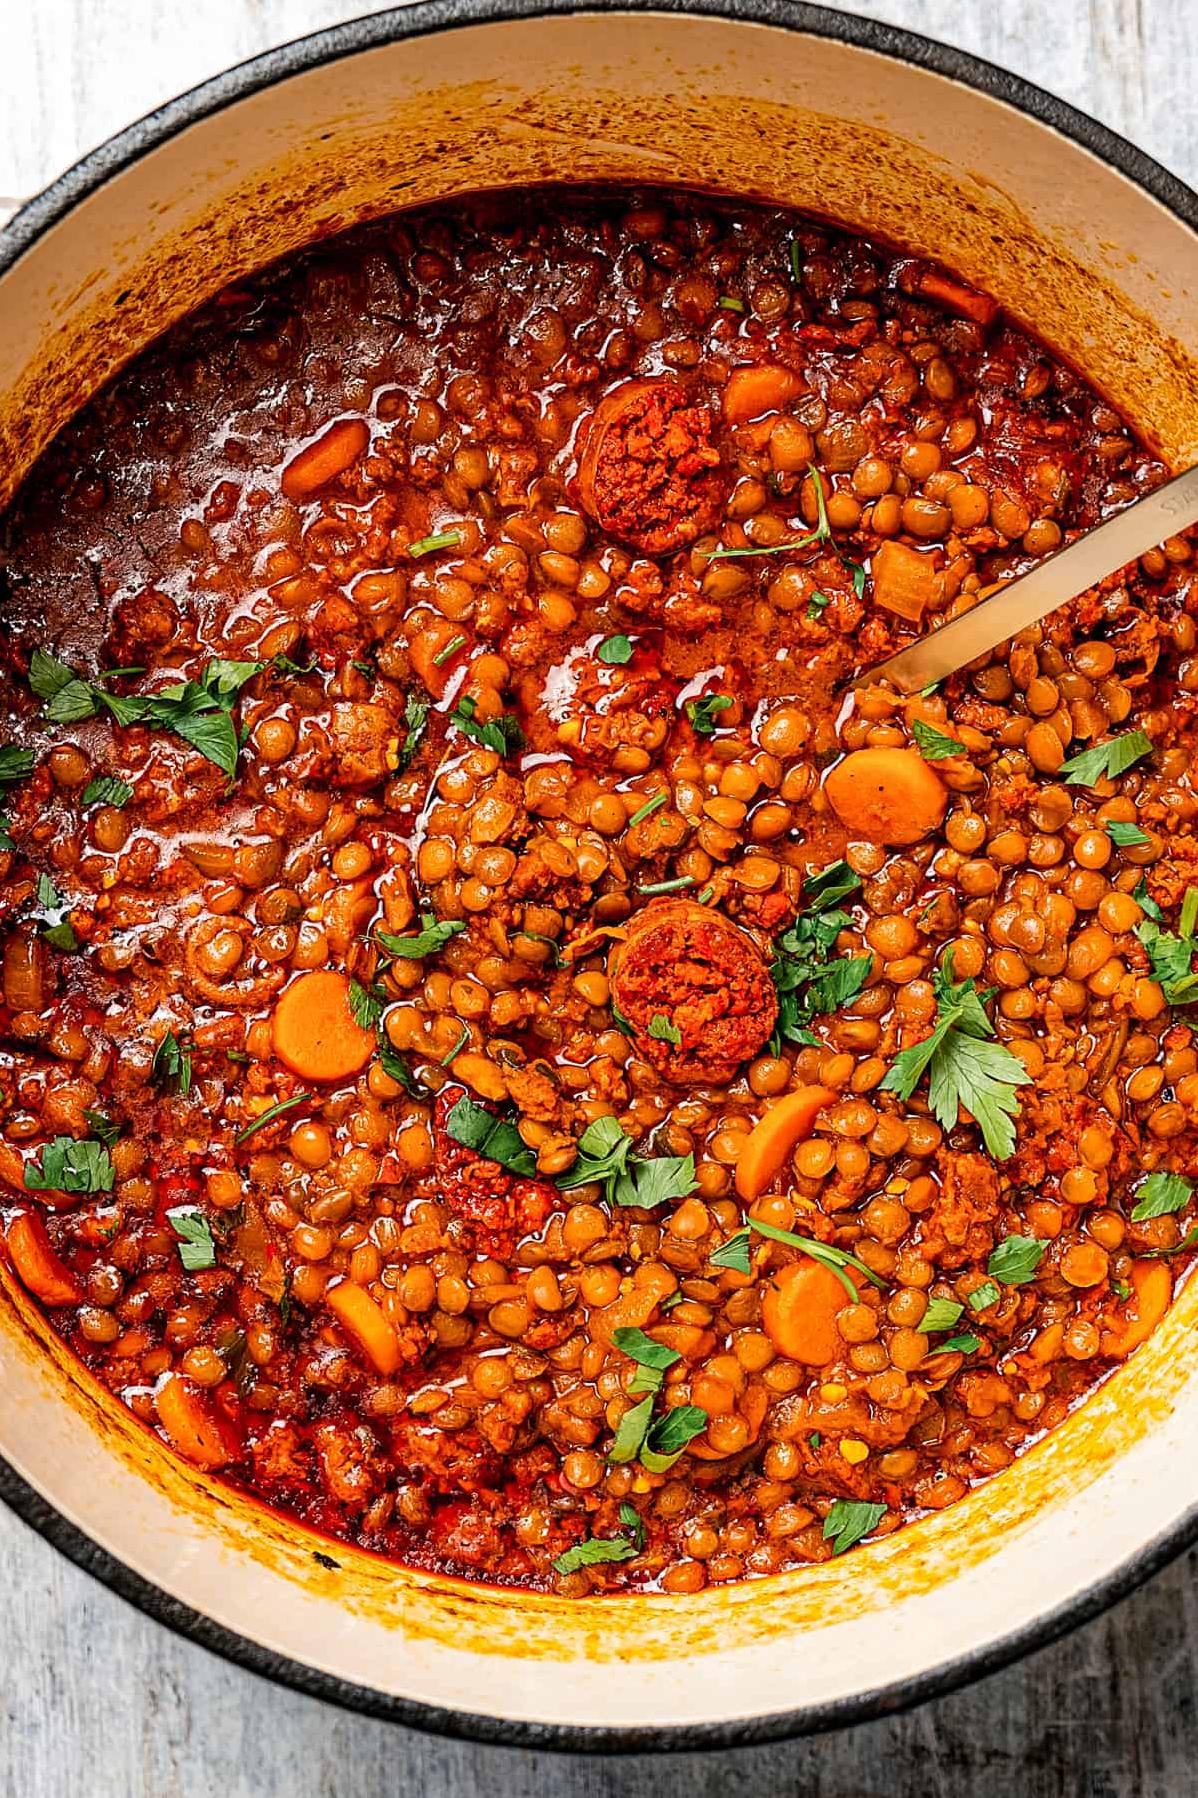  Lentils are packed full of protein, making this soup a great option for vegetarians.